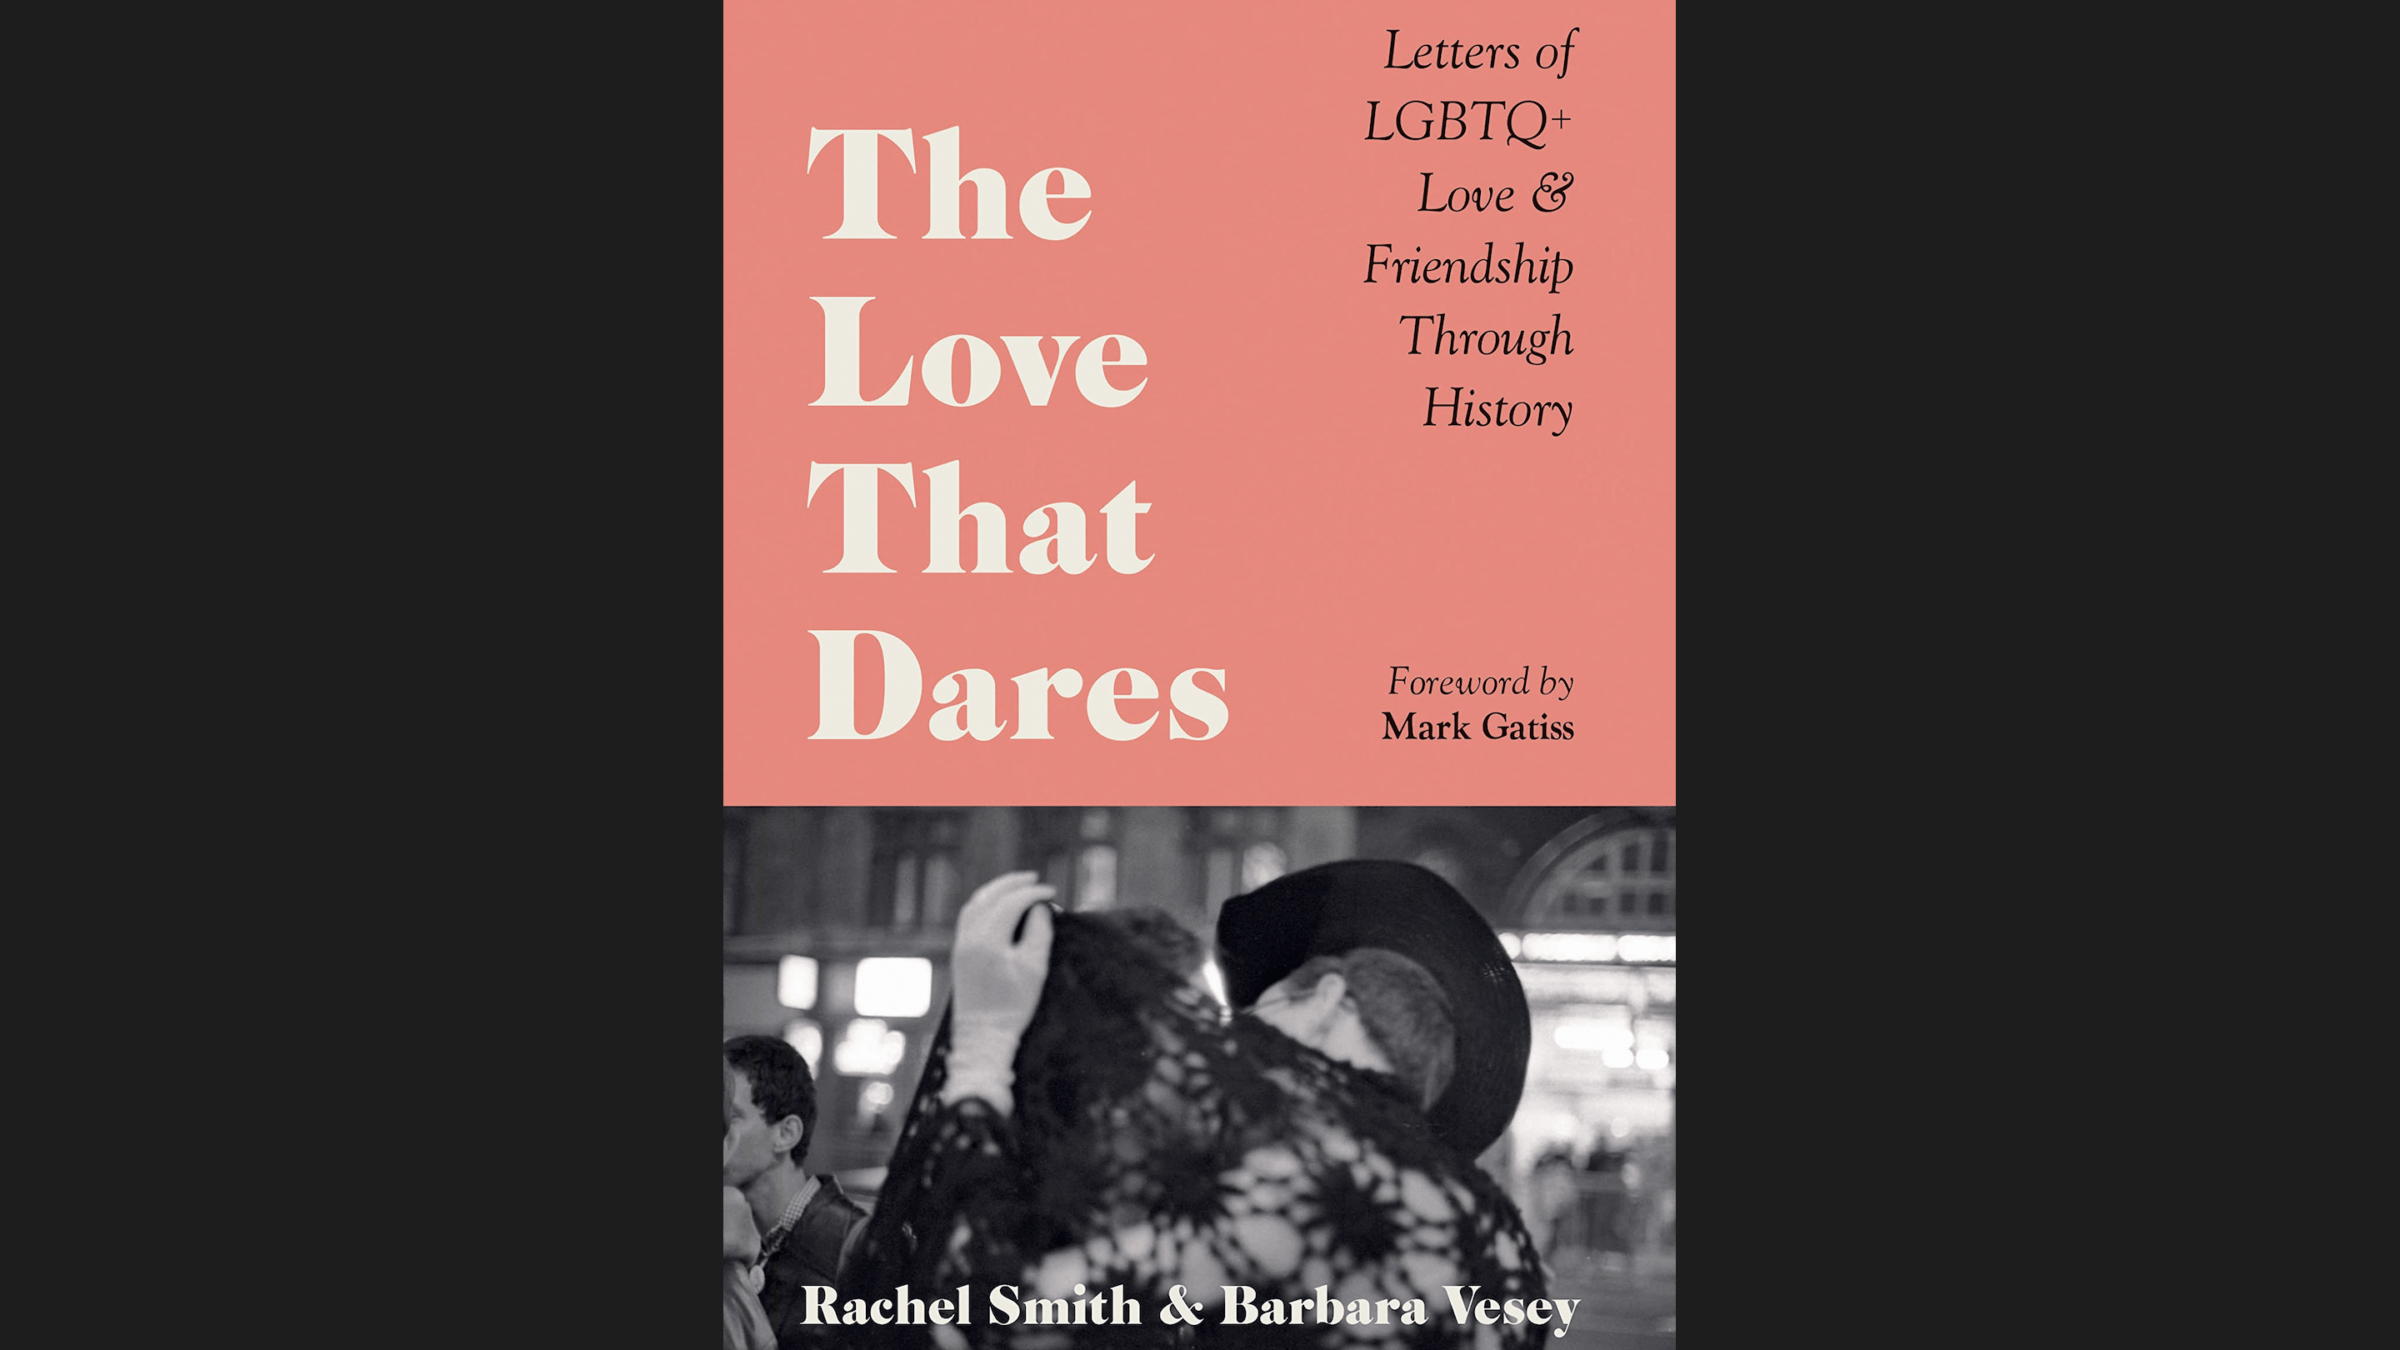 "The Love That Dares" is a new collection of letters and poems expressing LGBTQ love and friendship.